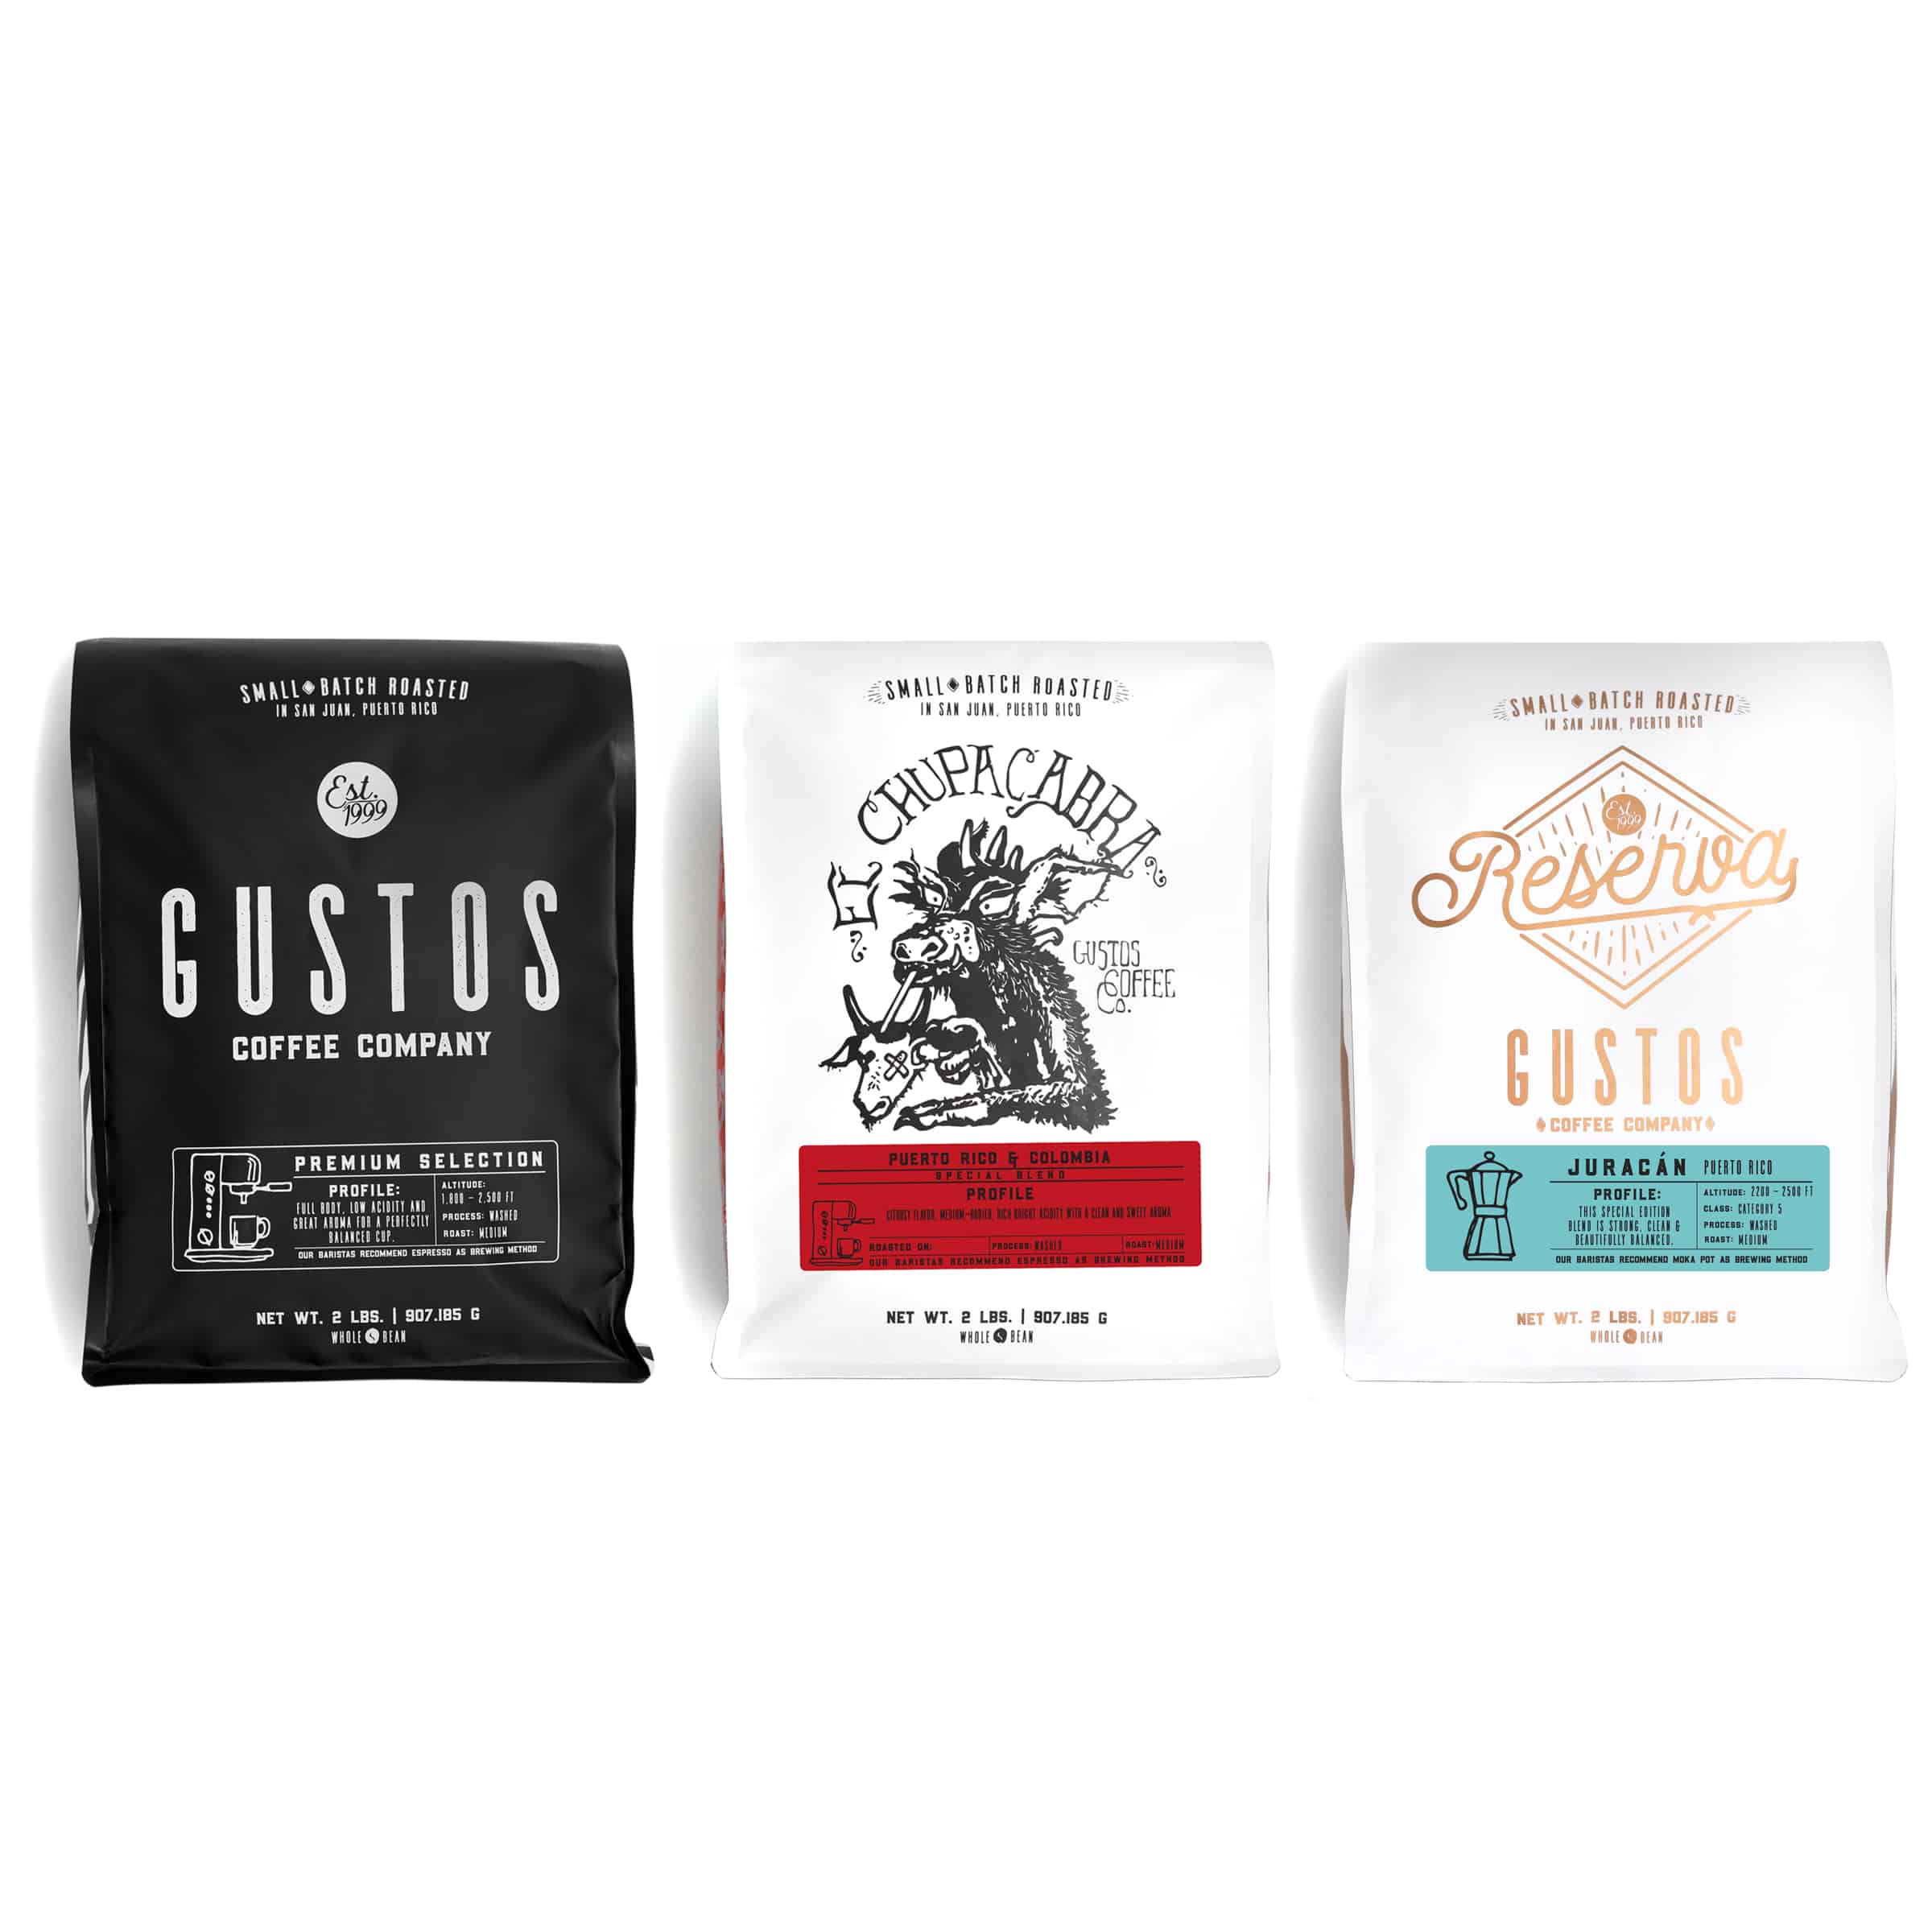 COL Gustos Coffee From Puerto Rico Specialty House Blend Trio 2LB BAGS